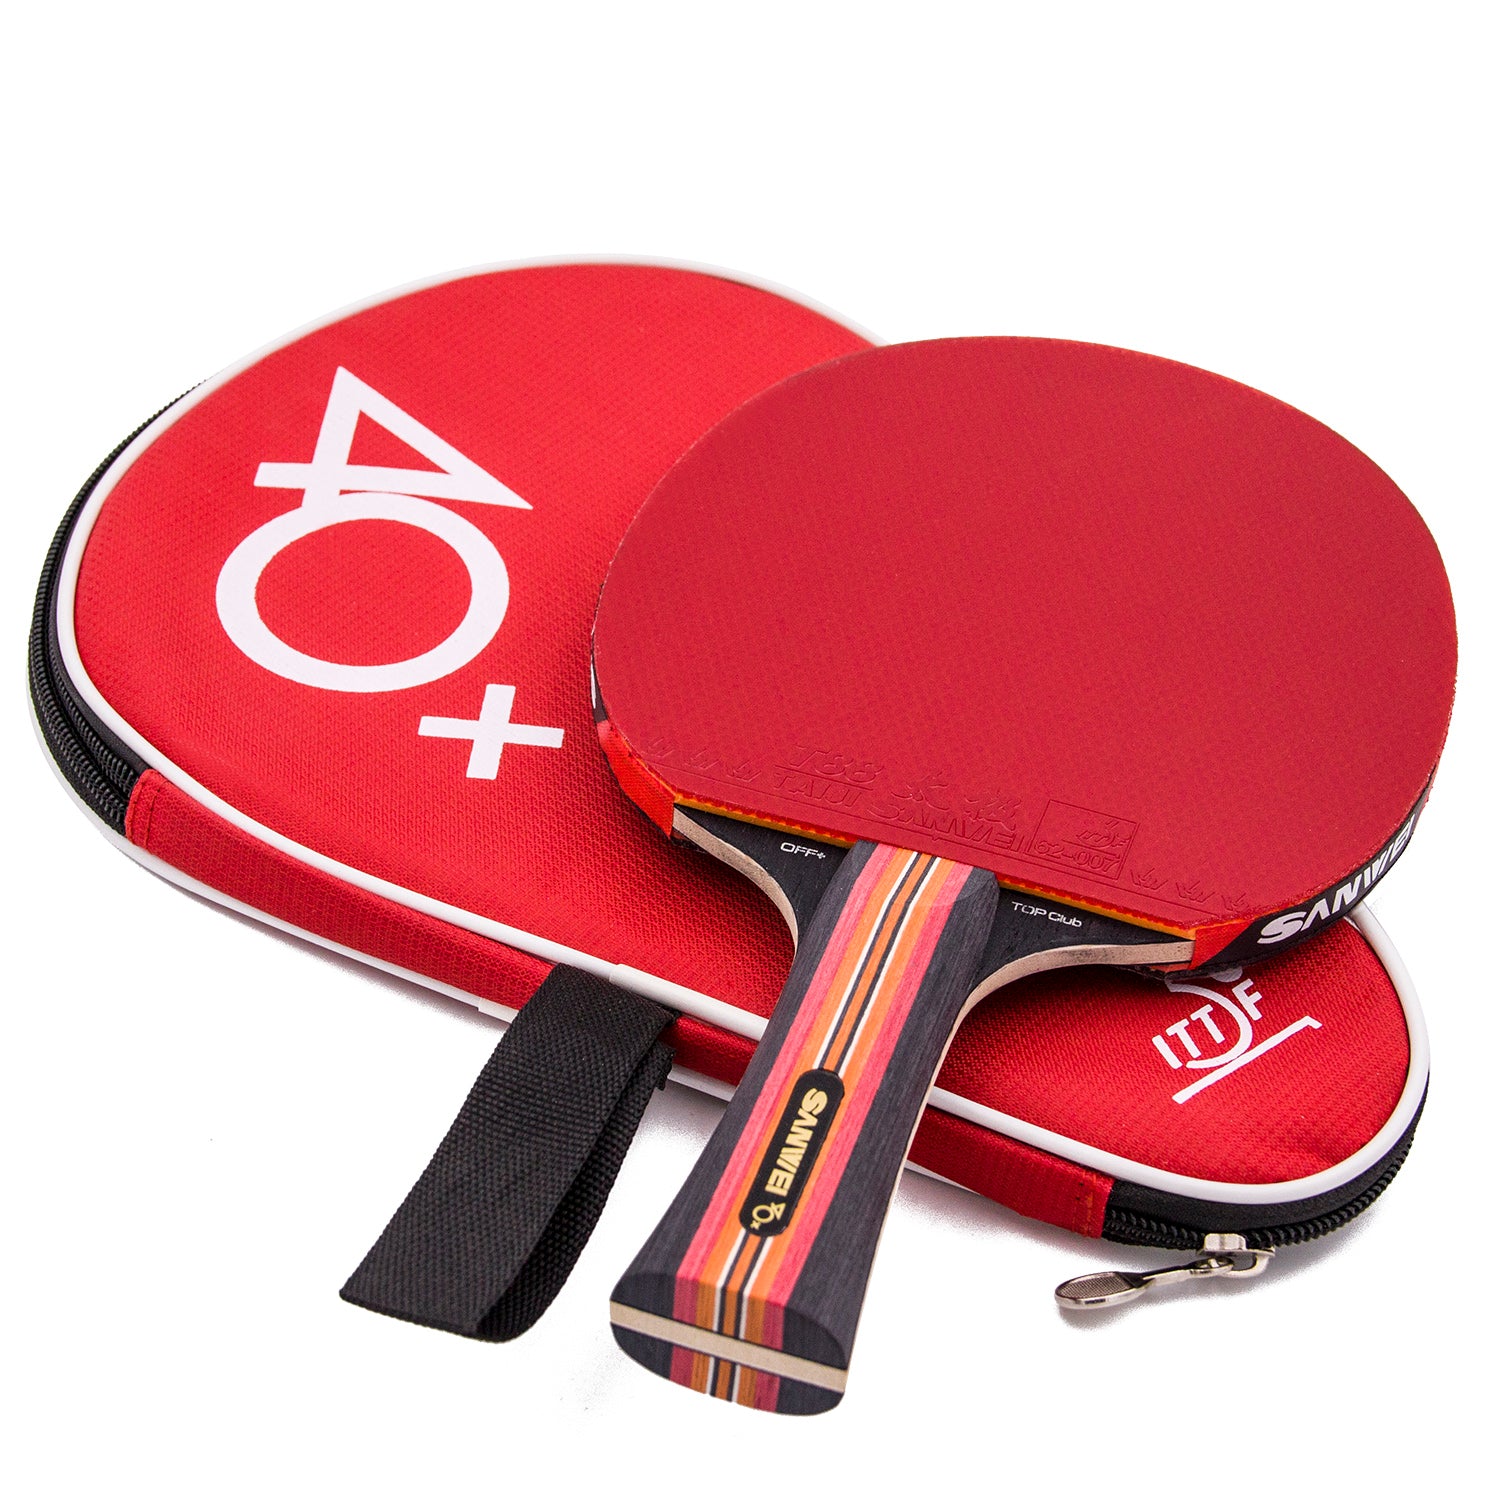 Sanwei TS7 Club Table Tennis Bat with T88 rubbers and a 5-ply blade, includes a red bat case, ideal for club players.